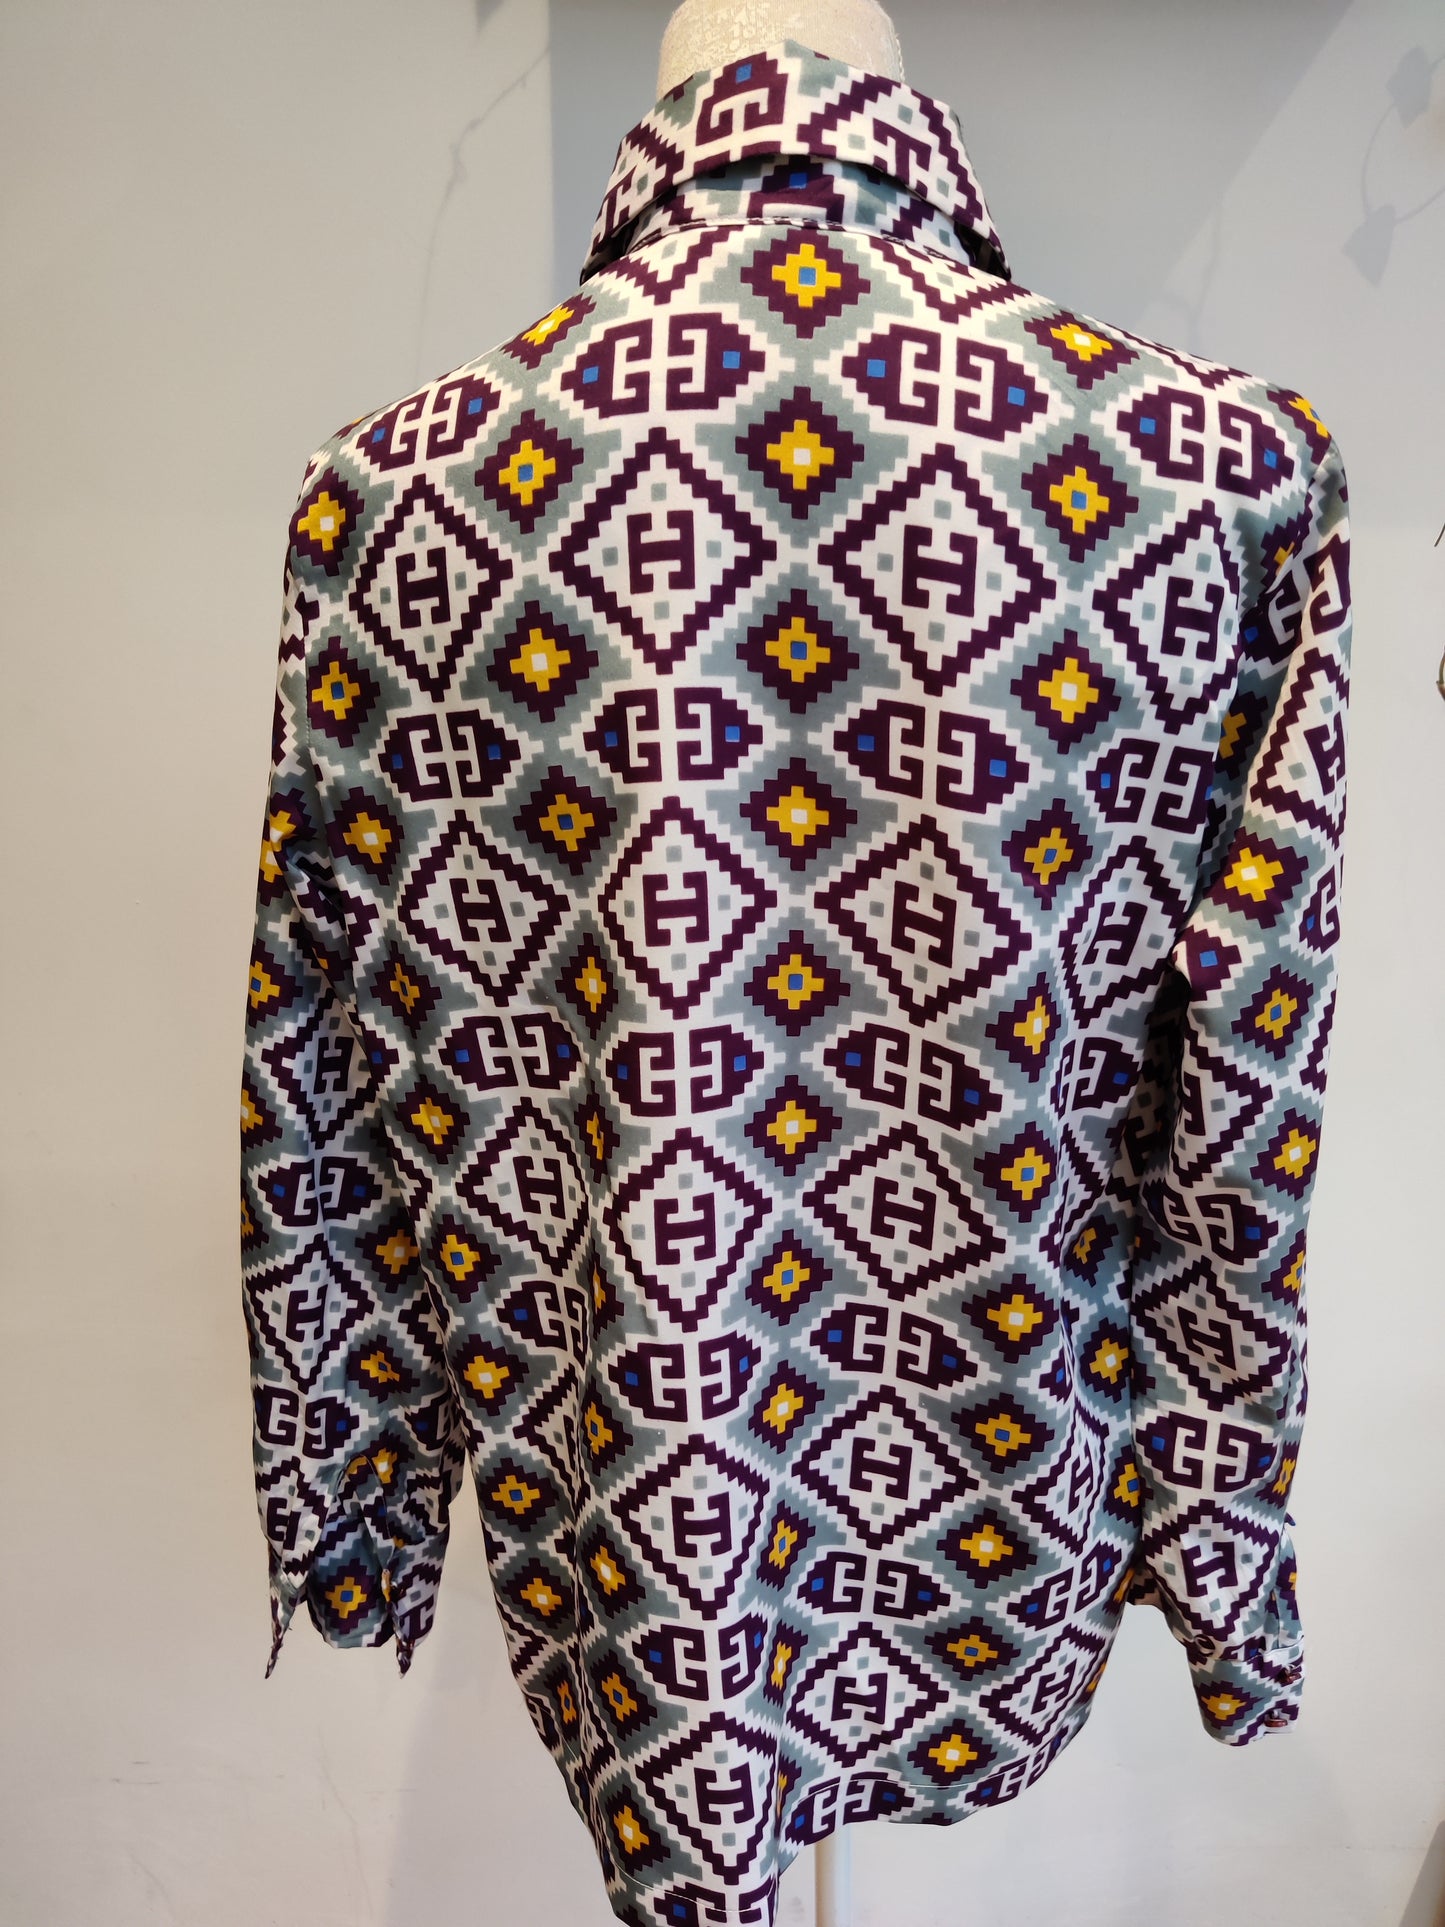 Incredible 70s psychedelic print shirt. Size 16-18.